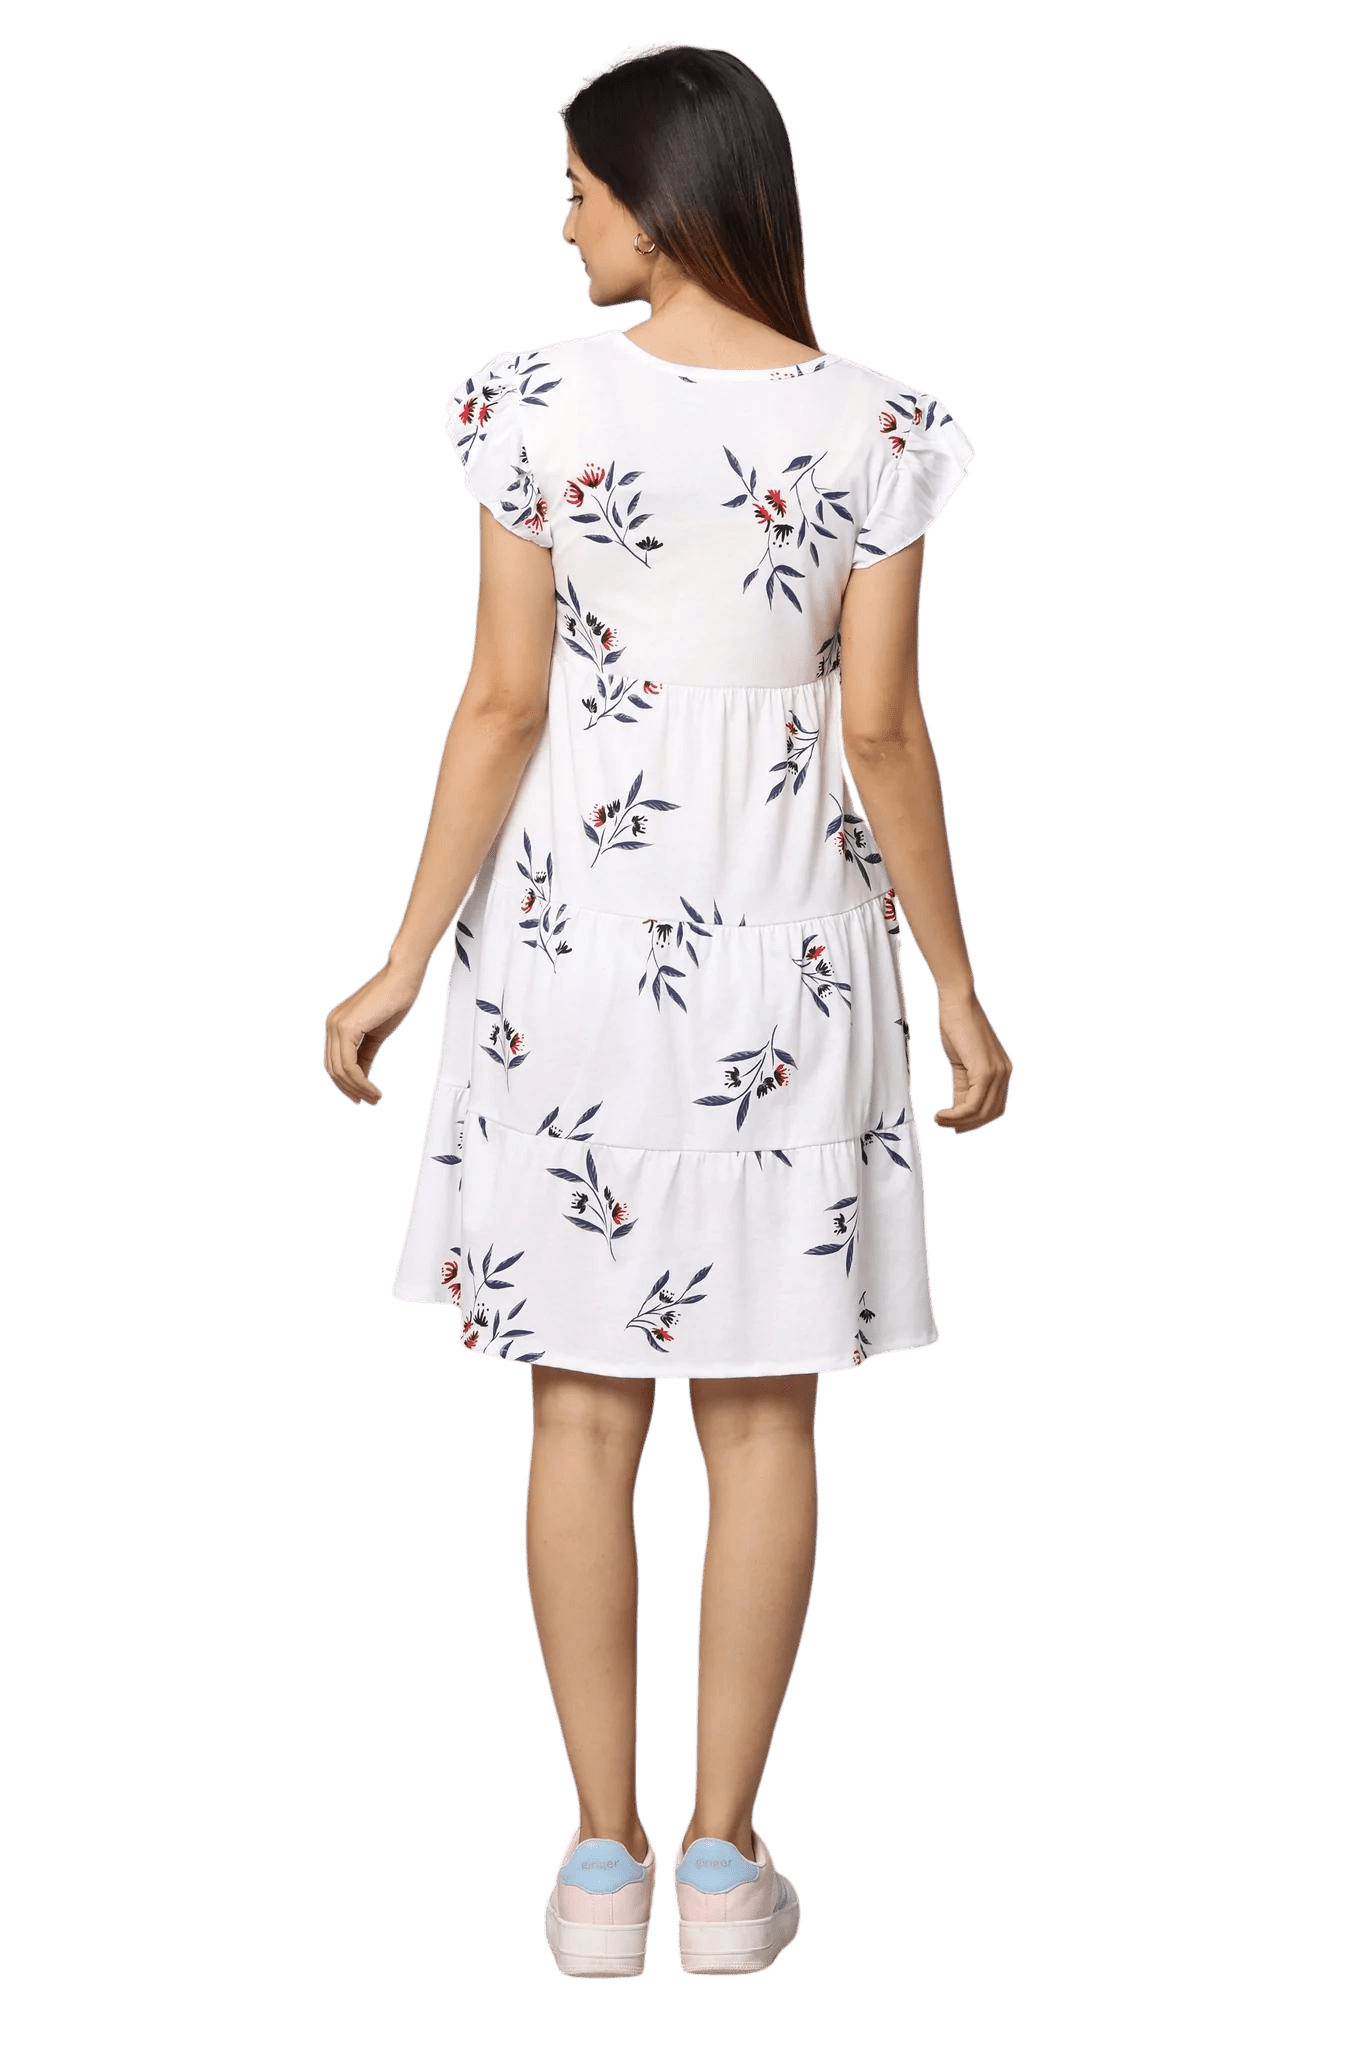 Floral White Mini Dress - 60% organic cotton & 40% recycled polyester - FLGD